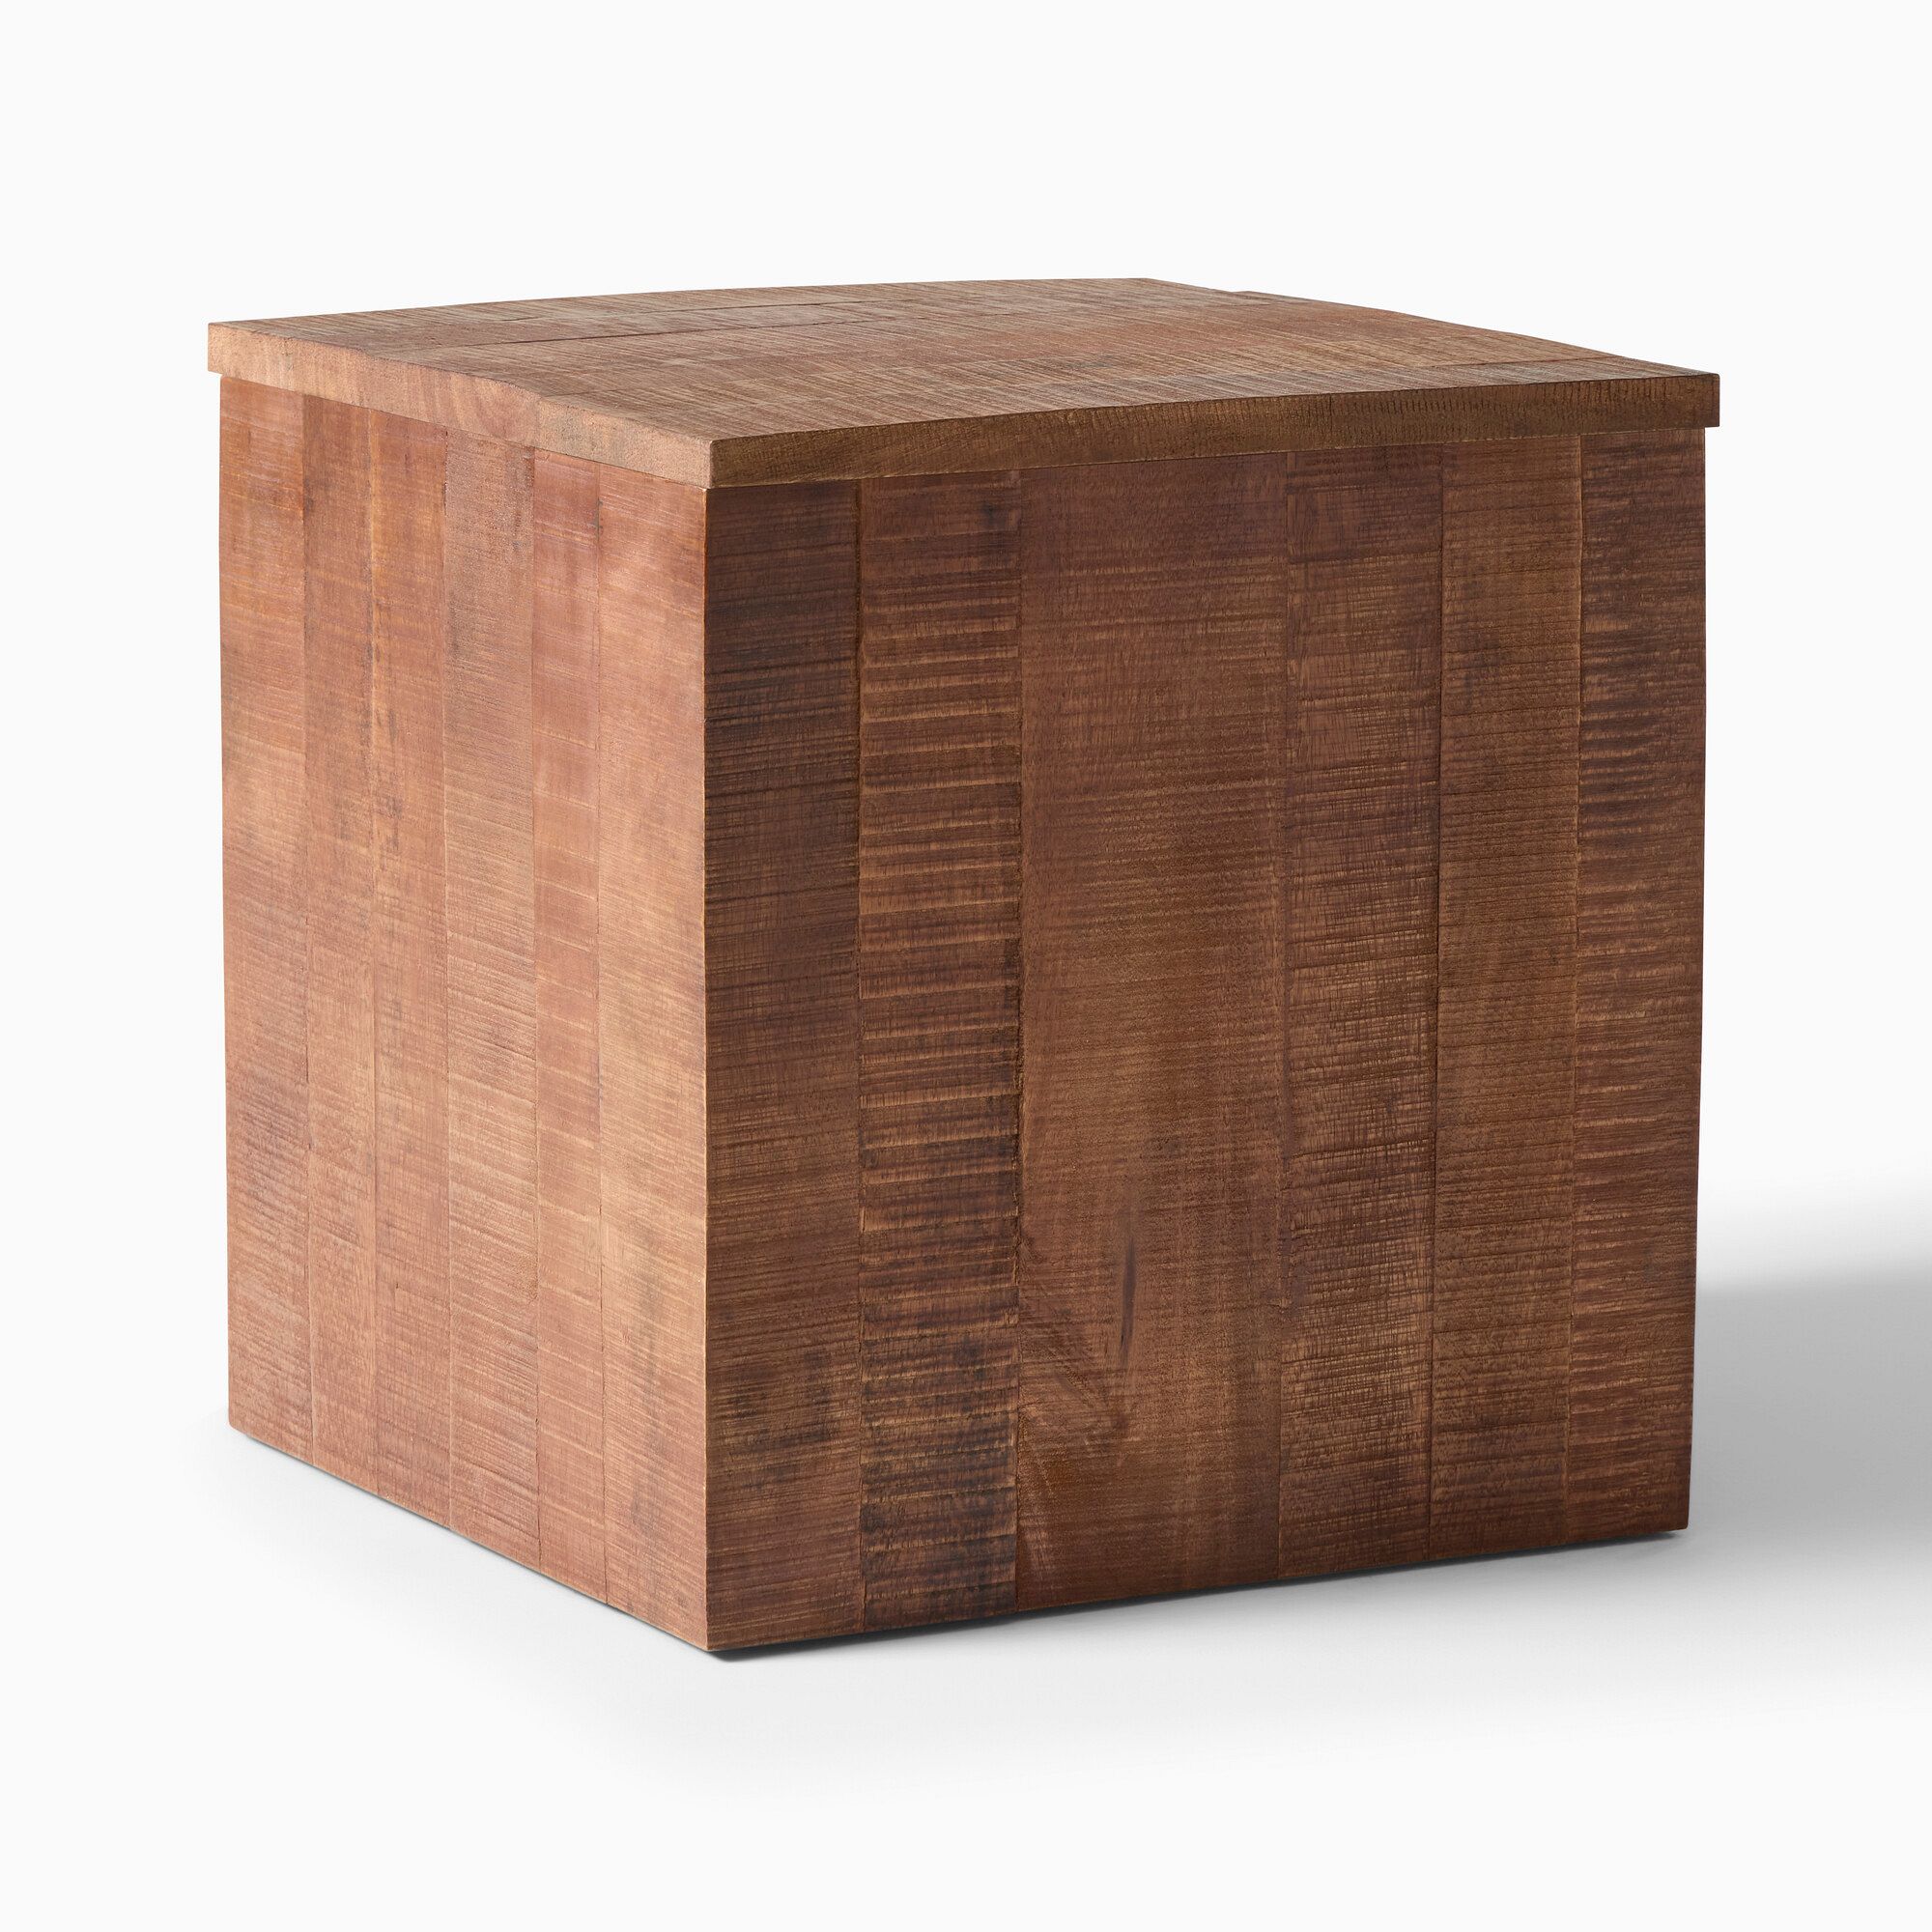 Colin King Rustic Wood Side Table (20") | West Elm